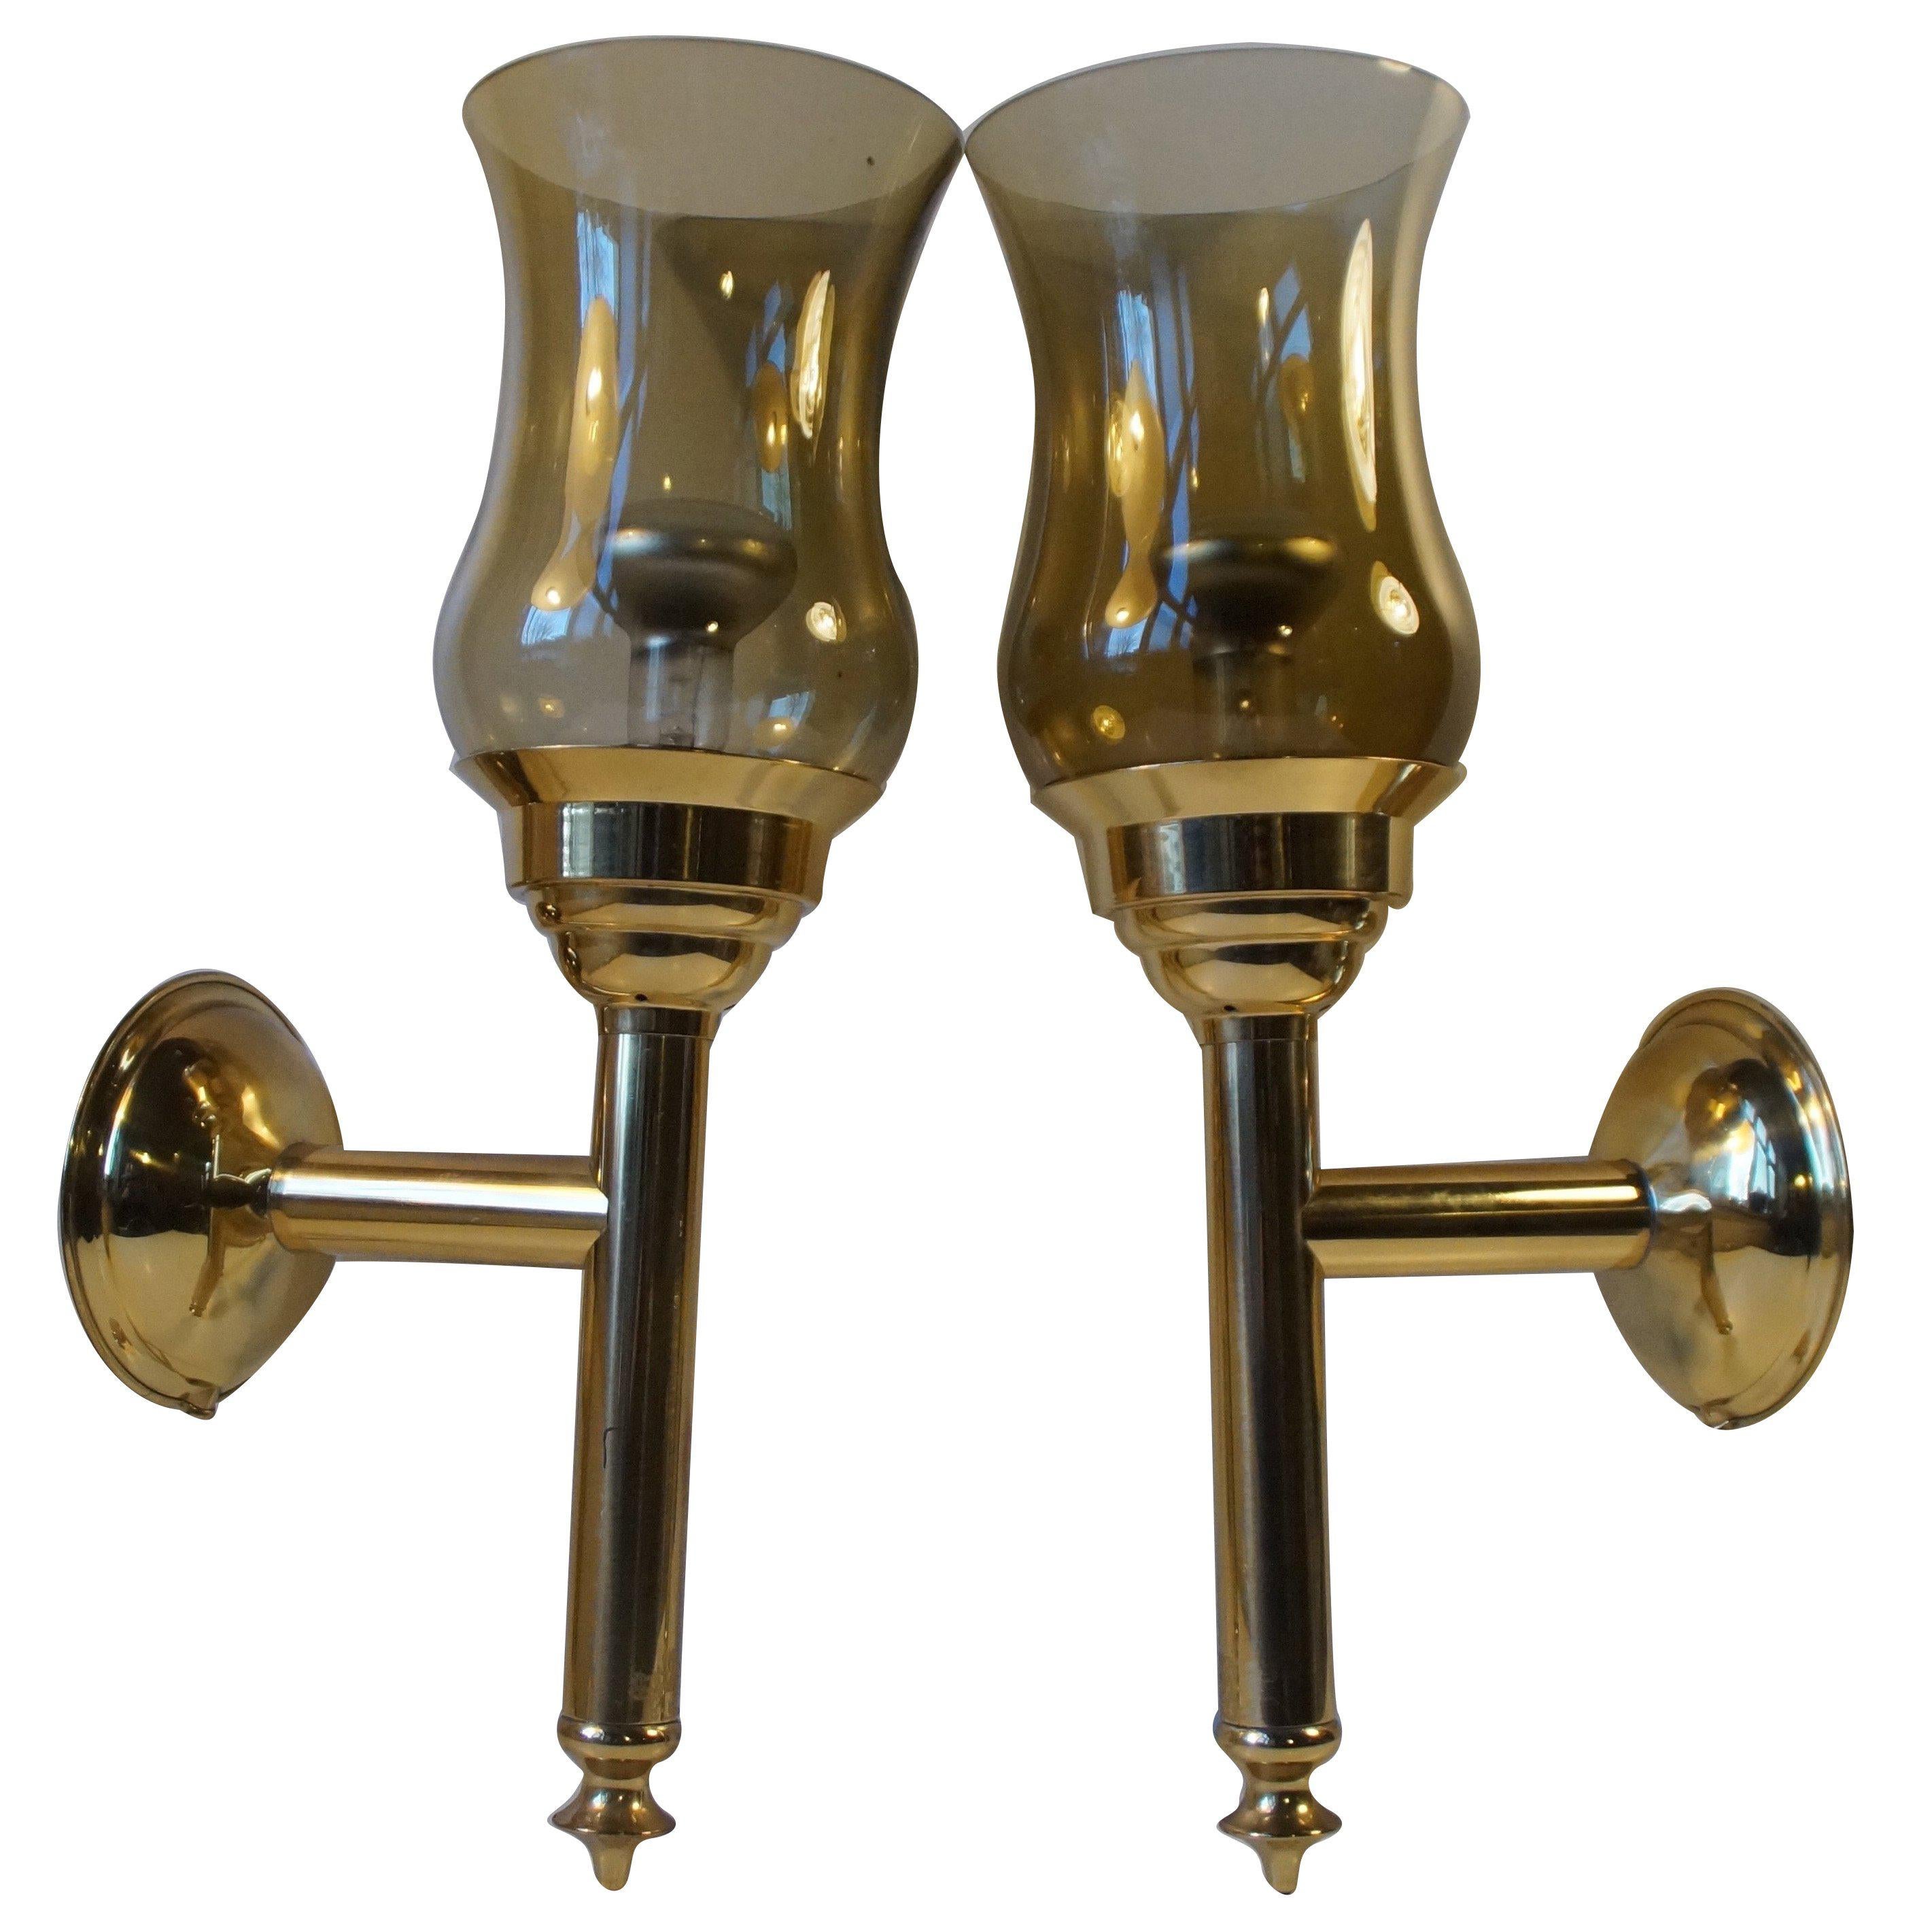 Scandinavian Modern Torch Wall Sconces in Brass and Smoke Glass For Sale